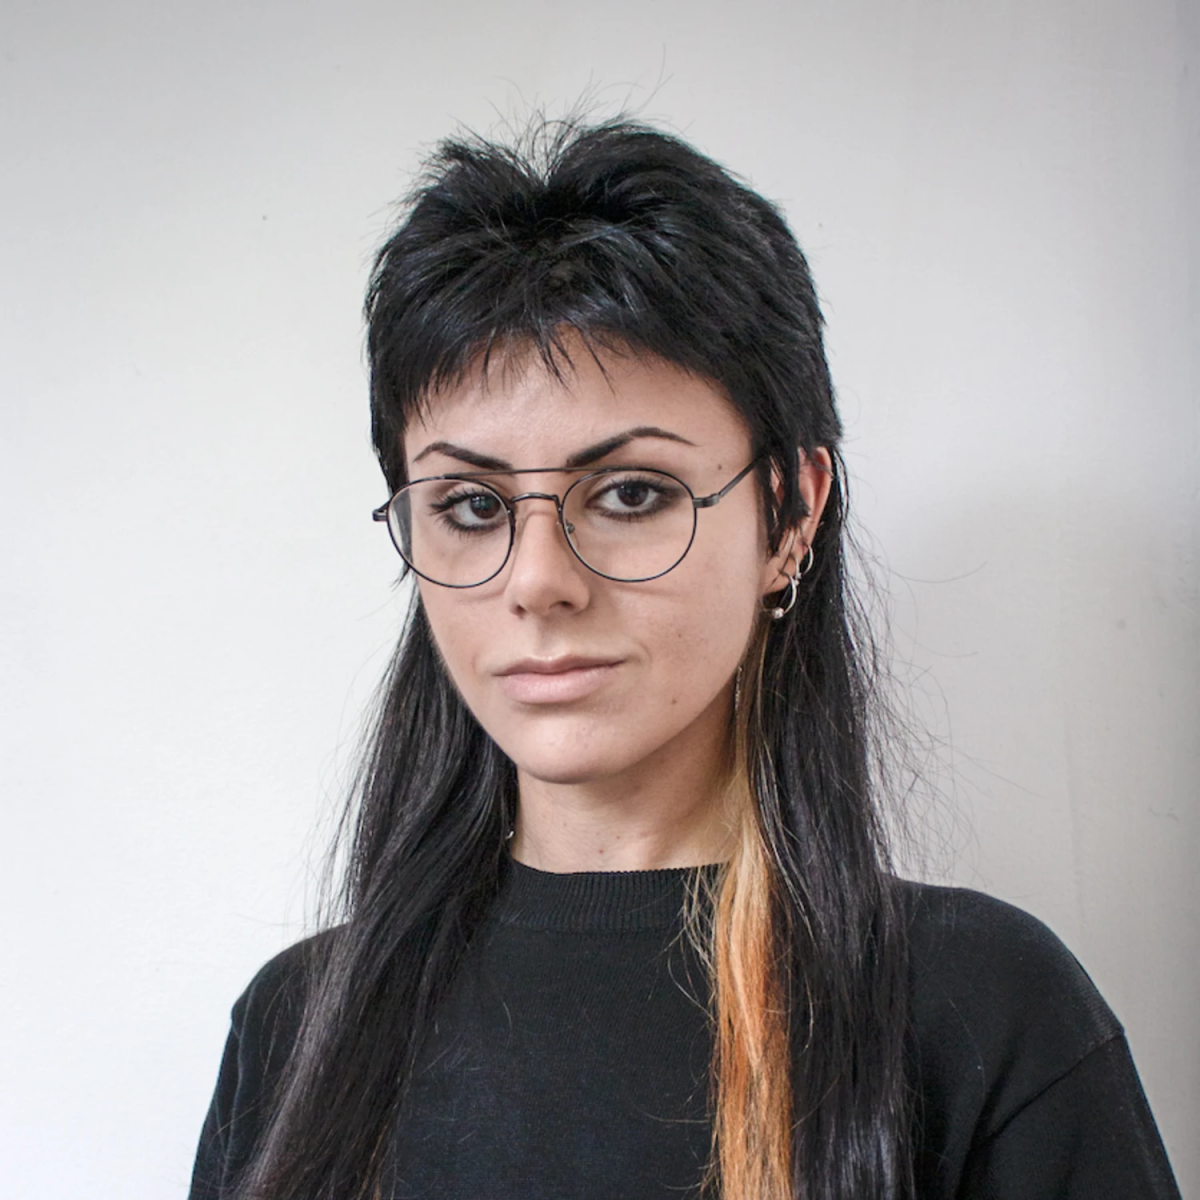 Image of Taraneh Azar. They have black hair and glasses.